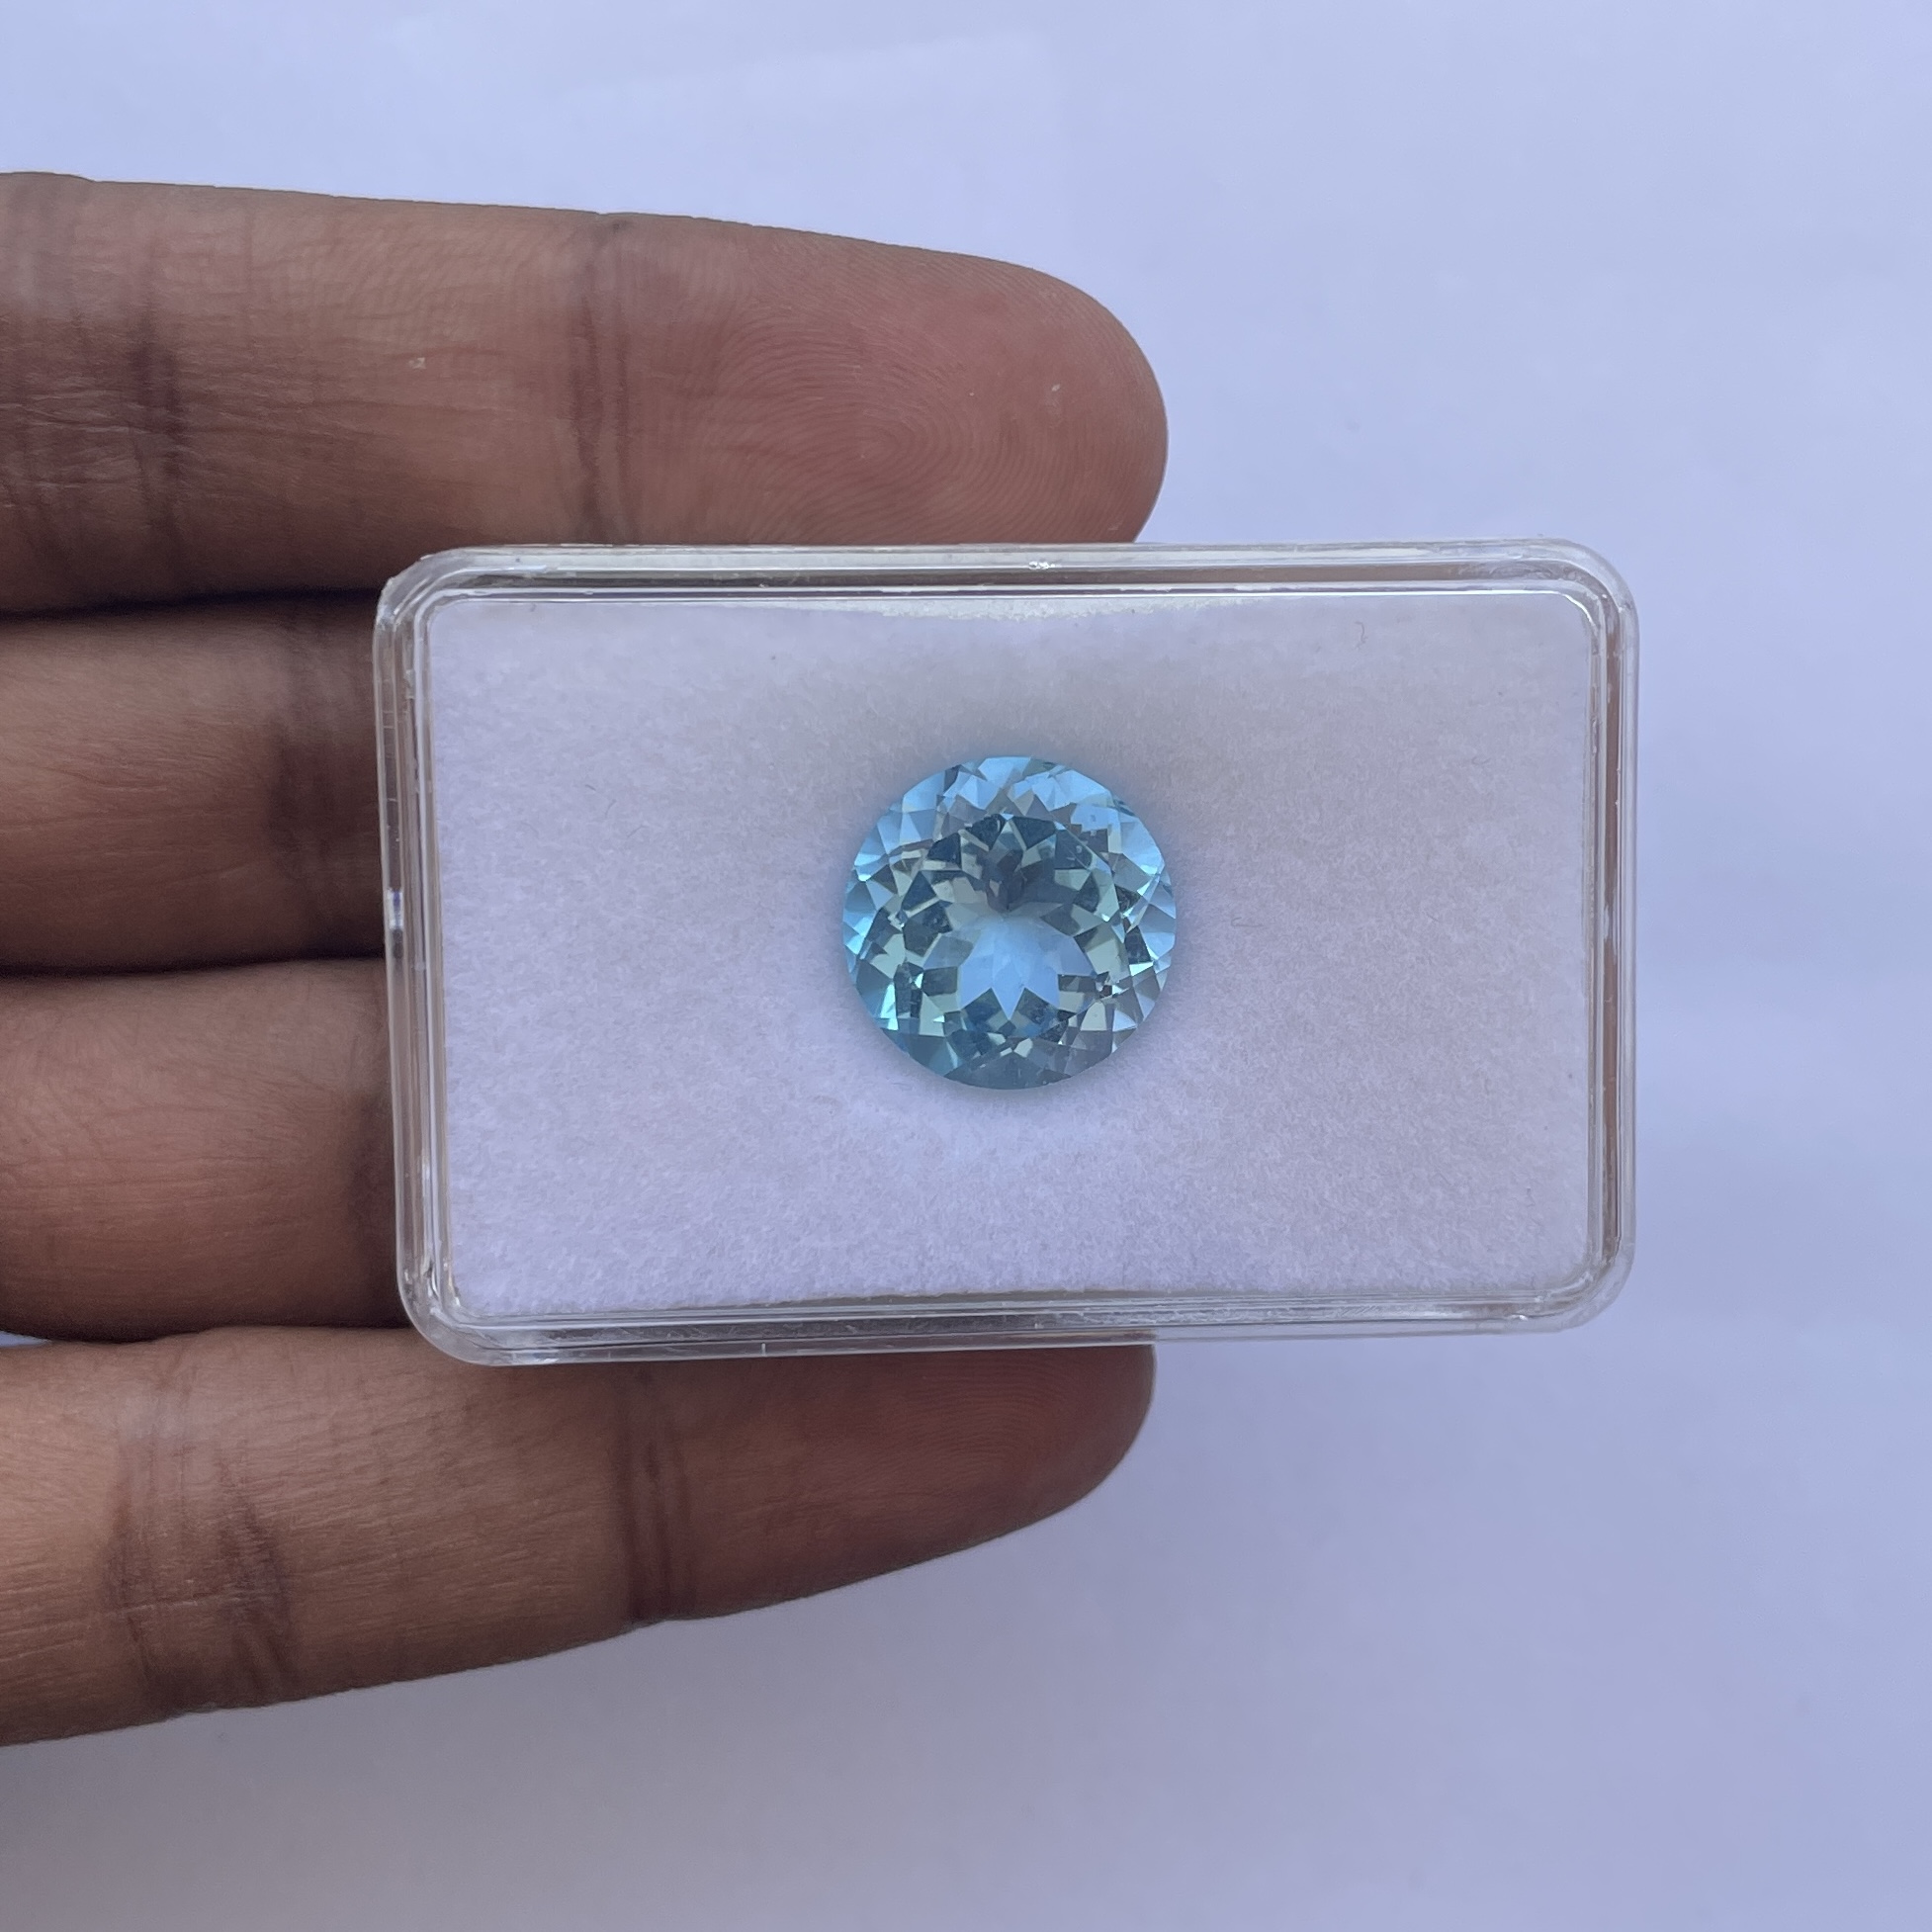 How To Buy Loose Gemstones - A Guide